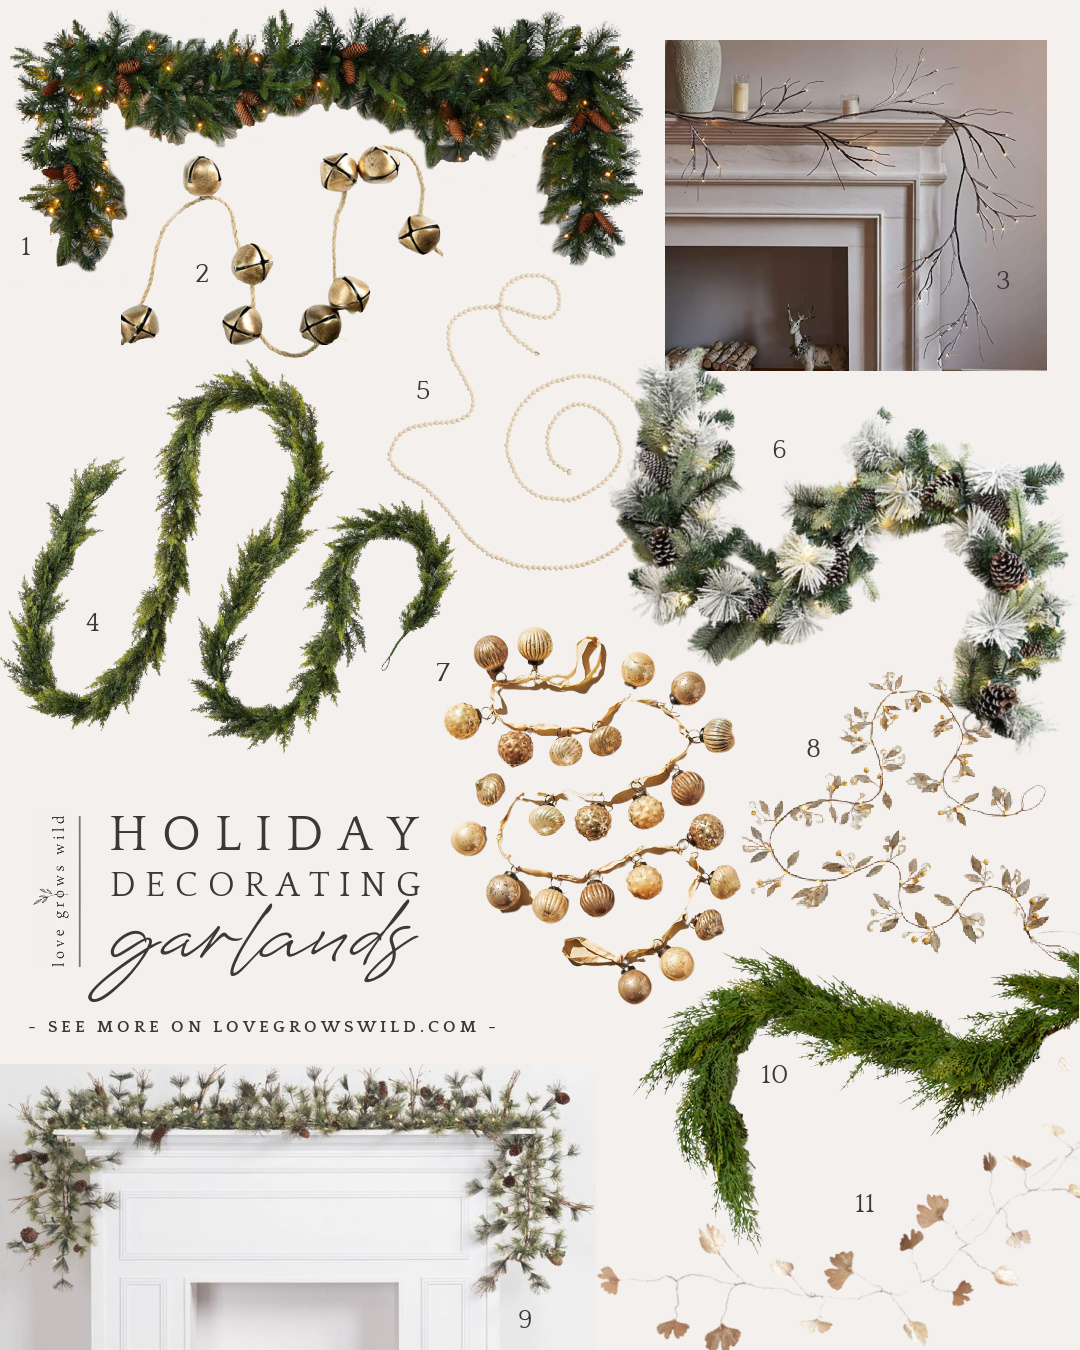 Christmas garlands for holiday decorating curated by home blogger Liz Fourez